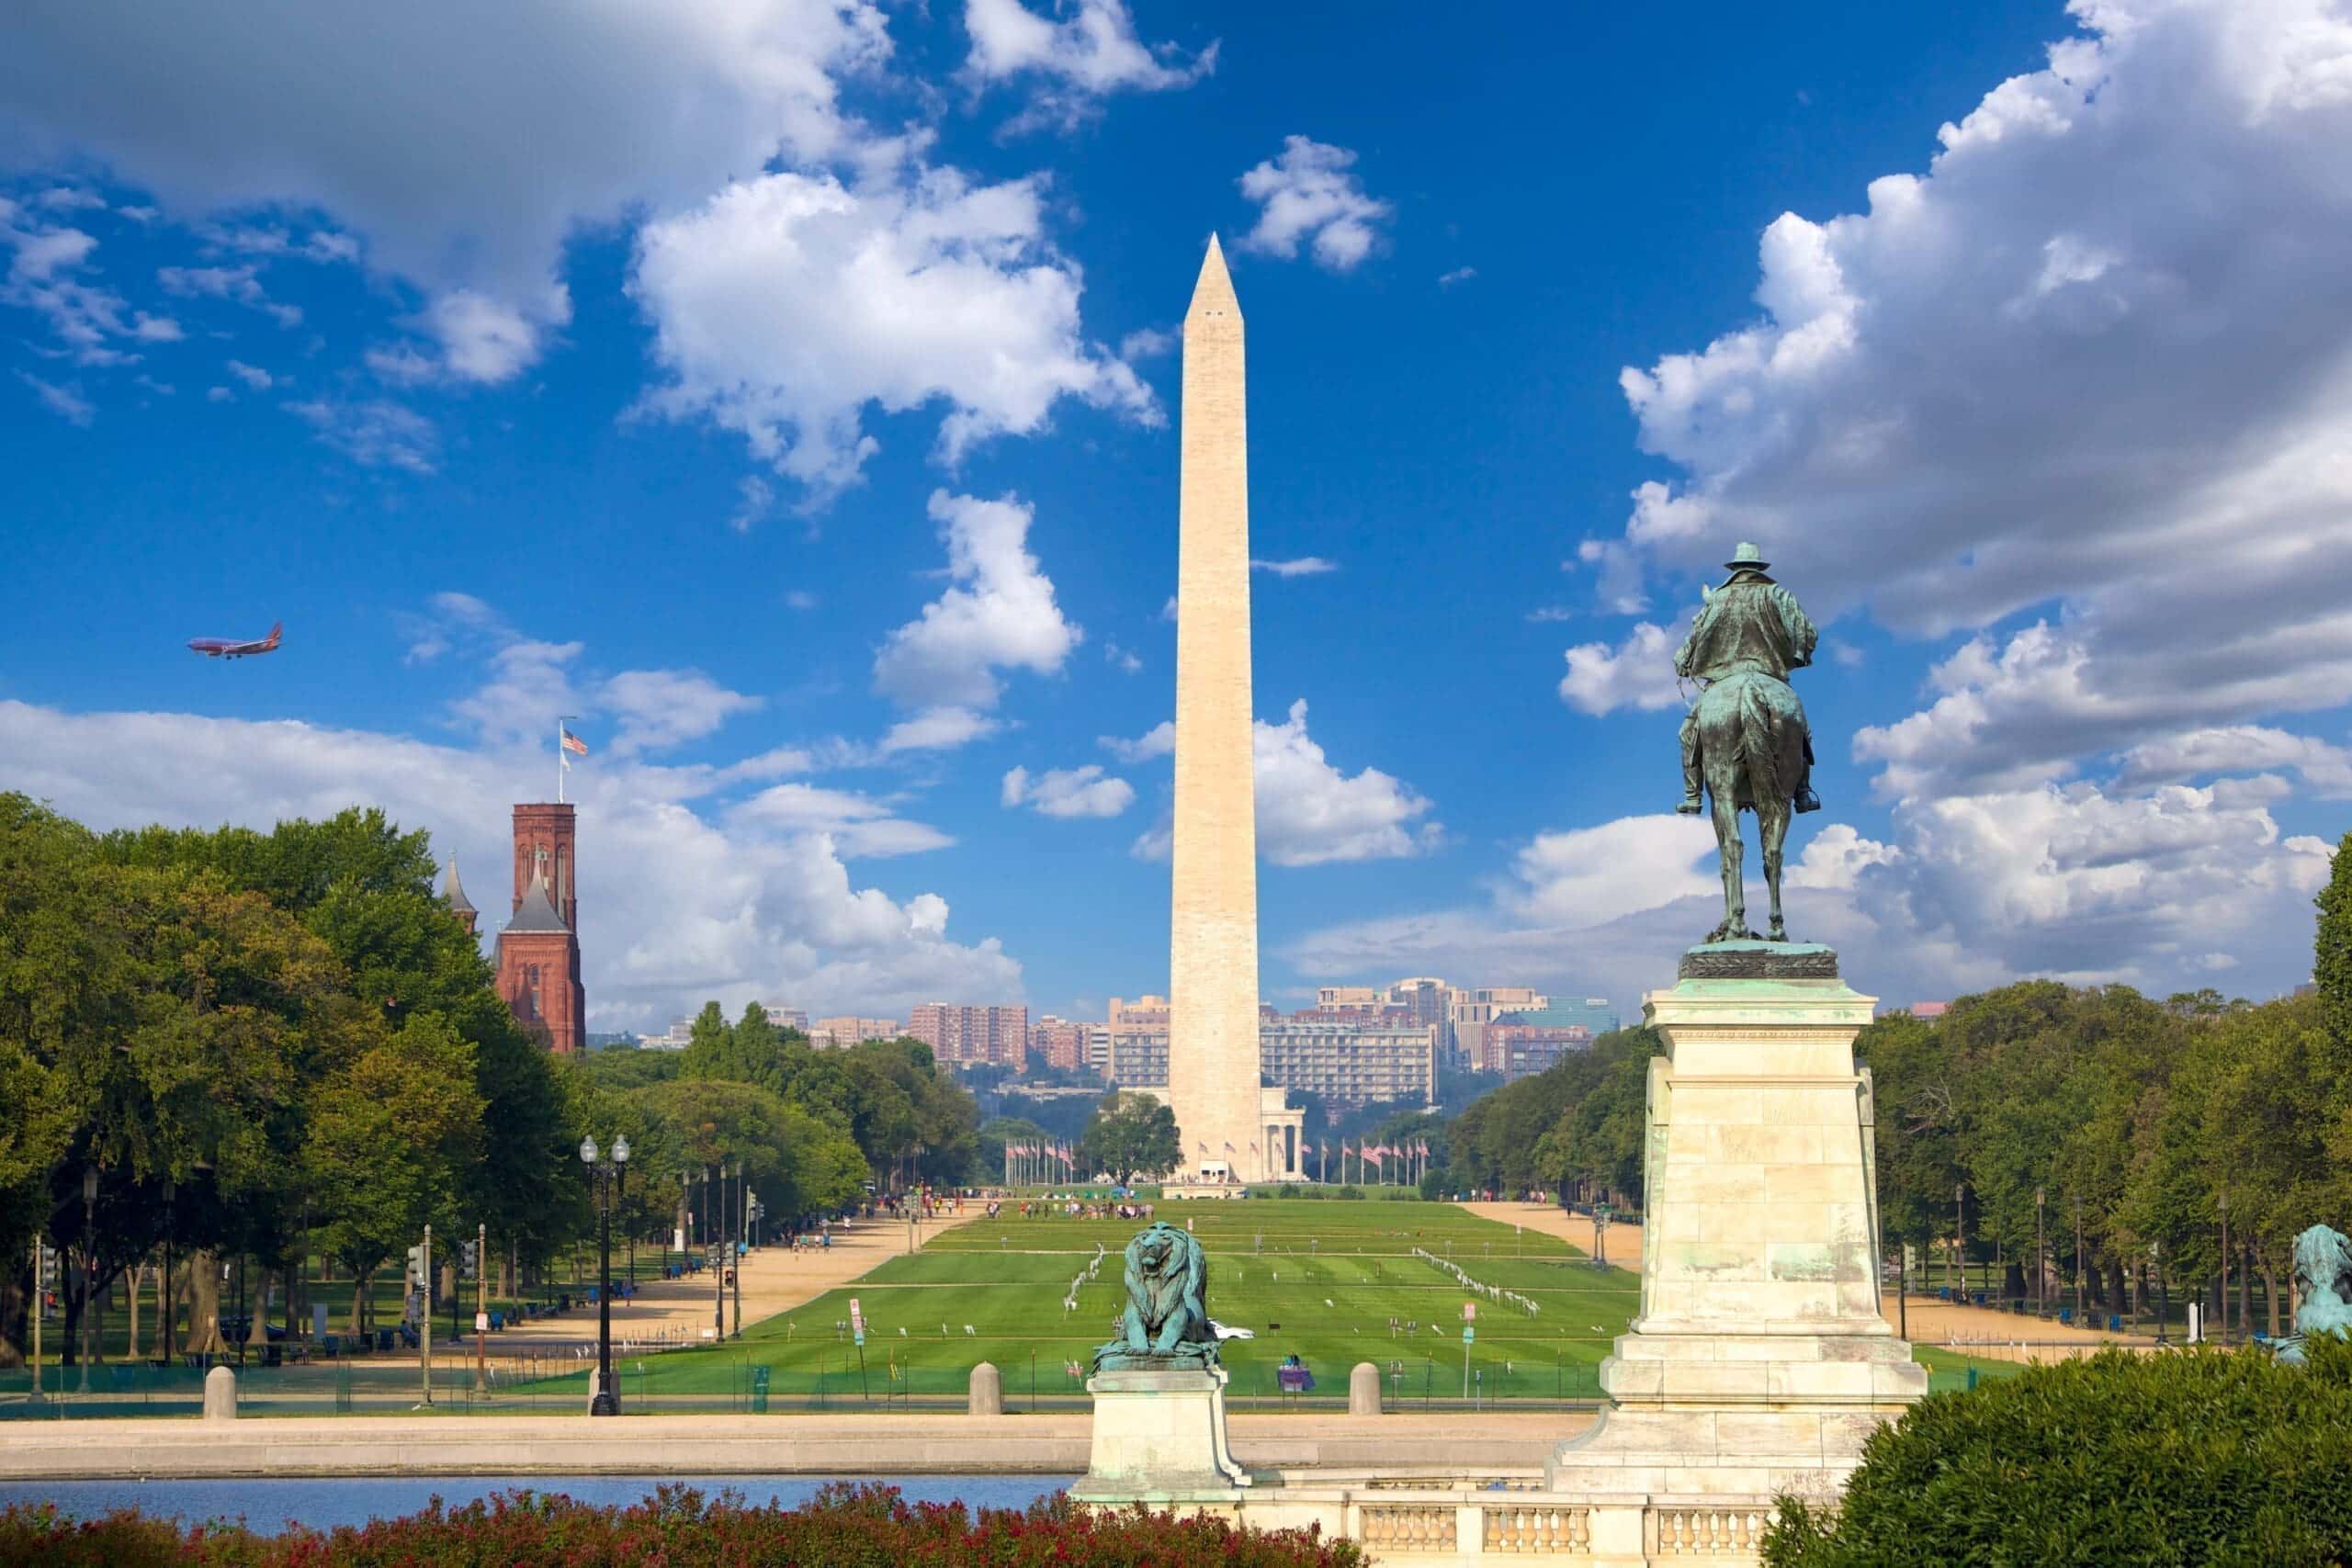 Exciting Washington DC Trivia Tour for kids, teens & young adults